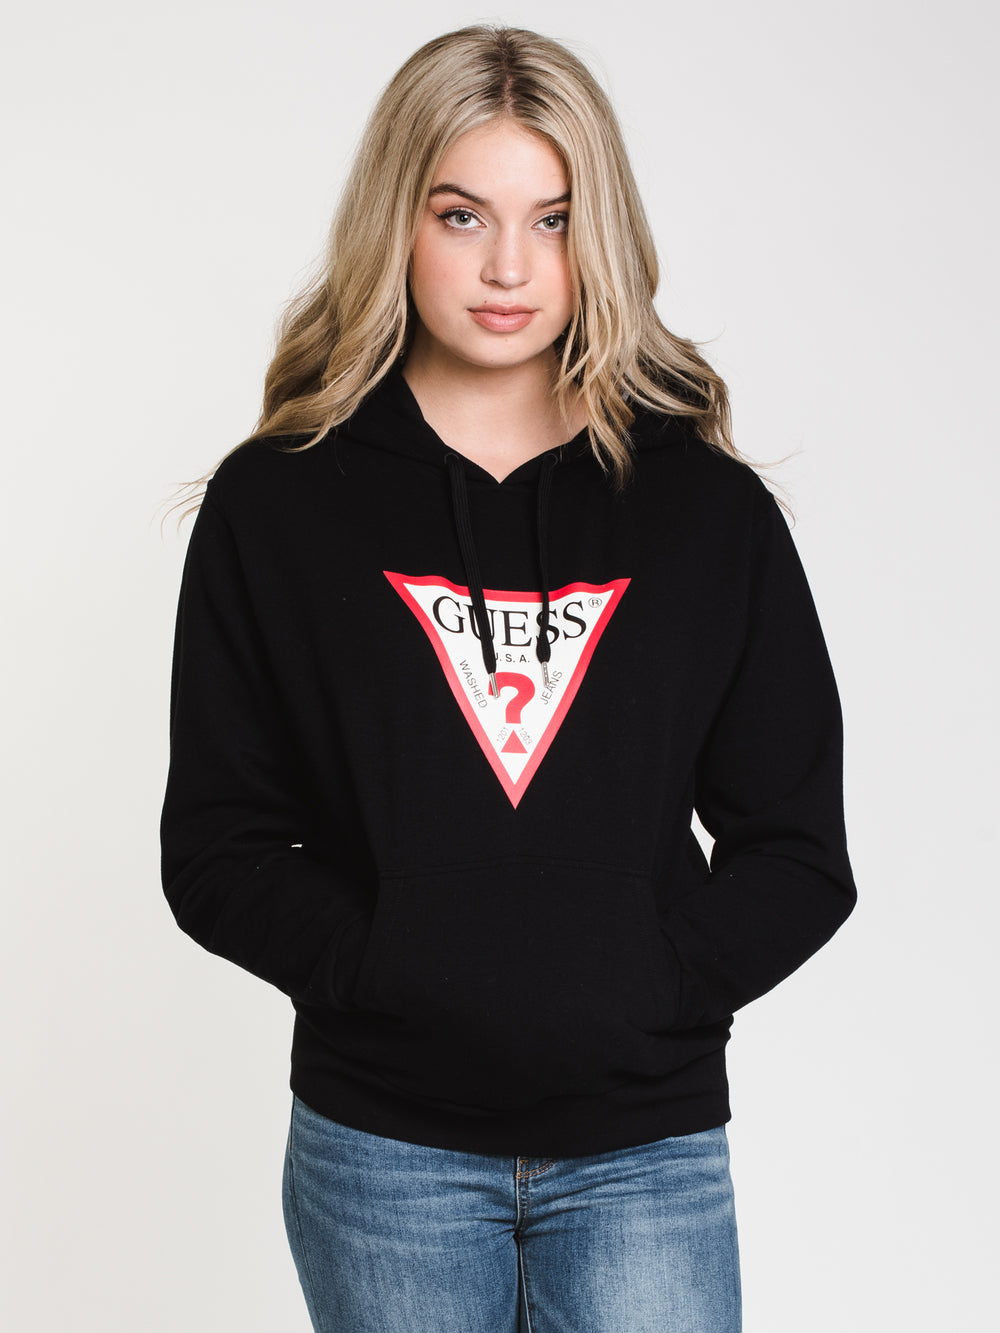 GUESS CLASSIC TRIANGLE LOGO HOODIE  - CLEARANCE